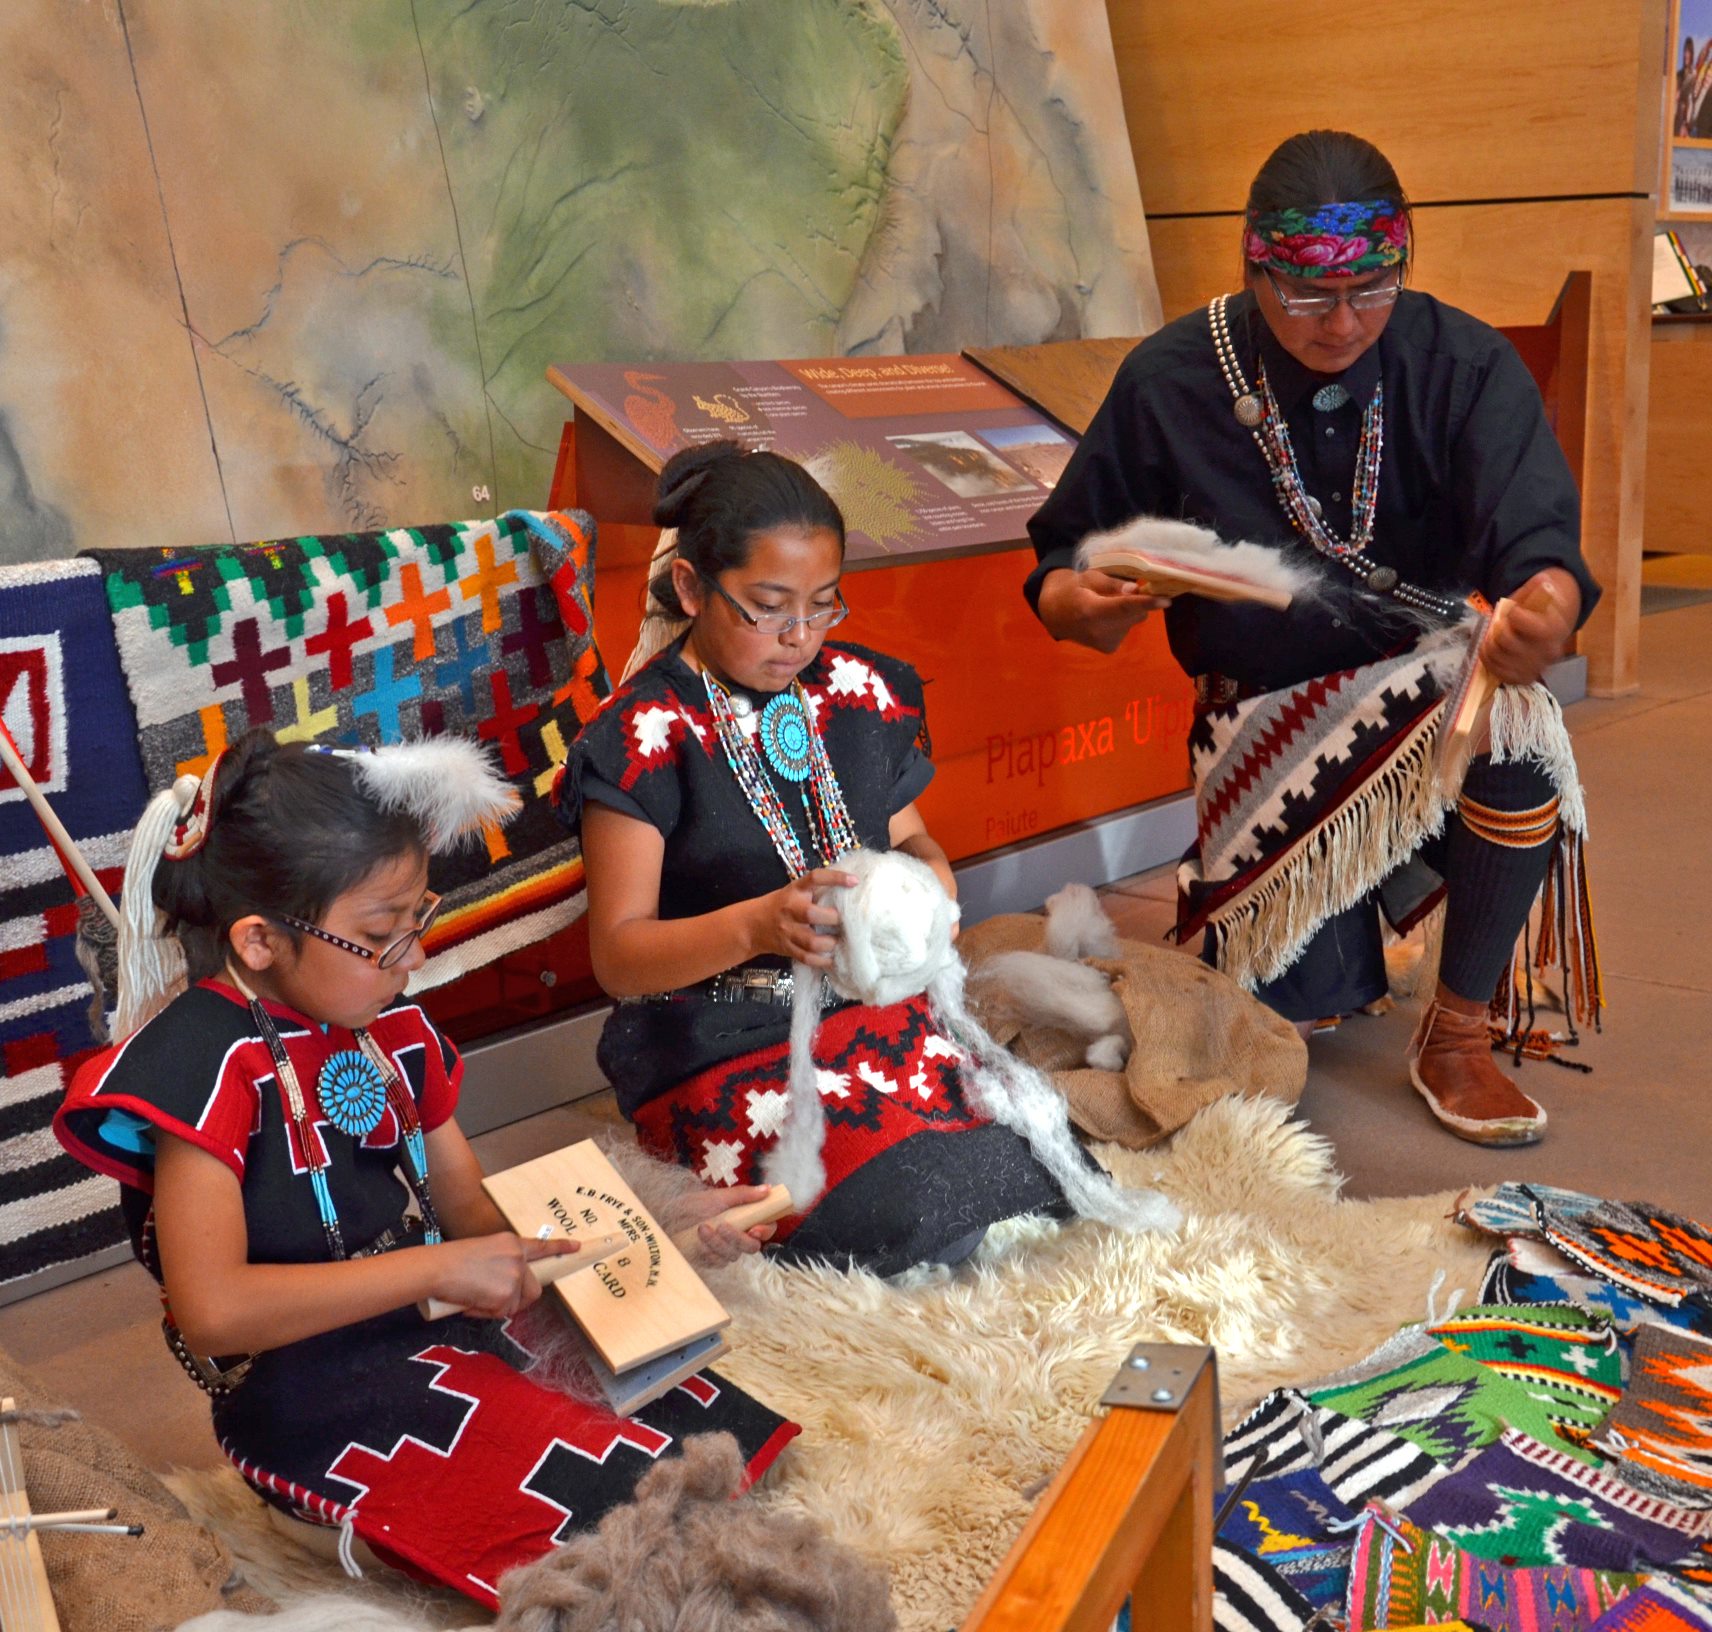 Three Dine tribal members demonstrate carding wool at the Grand Canyon Visitor Center